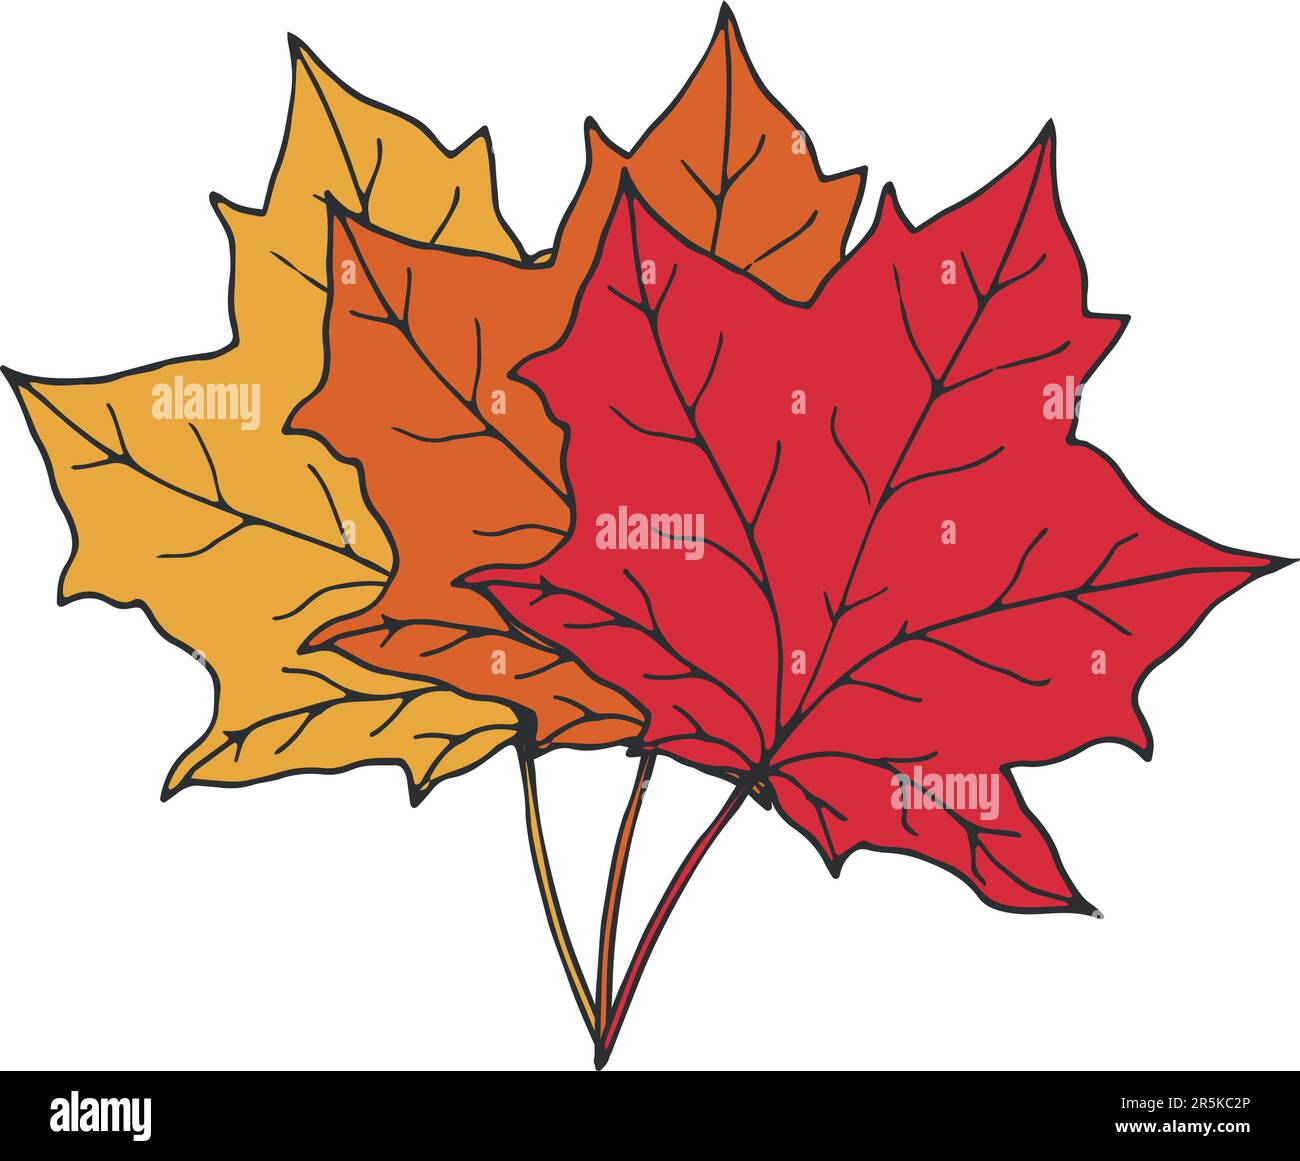 Three maple leaves in different autumn colors red, orange and yellow. Hand drawn botanical elements isolated on white background Stock Vector